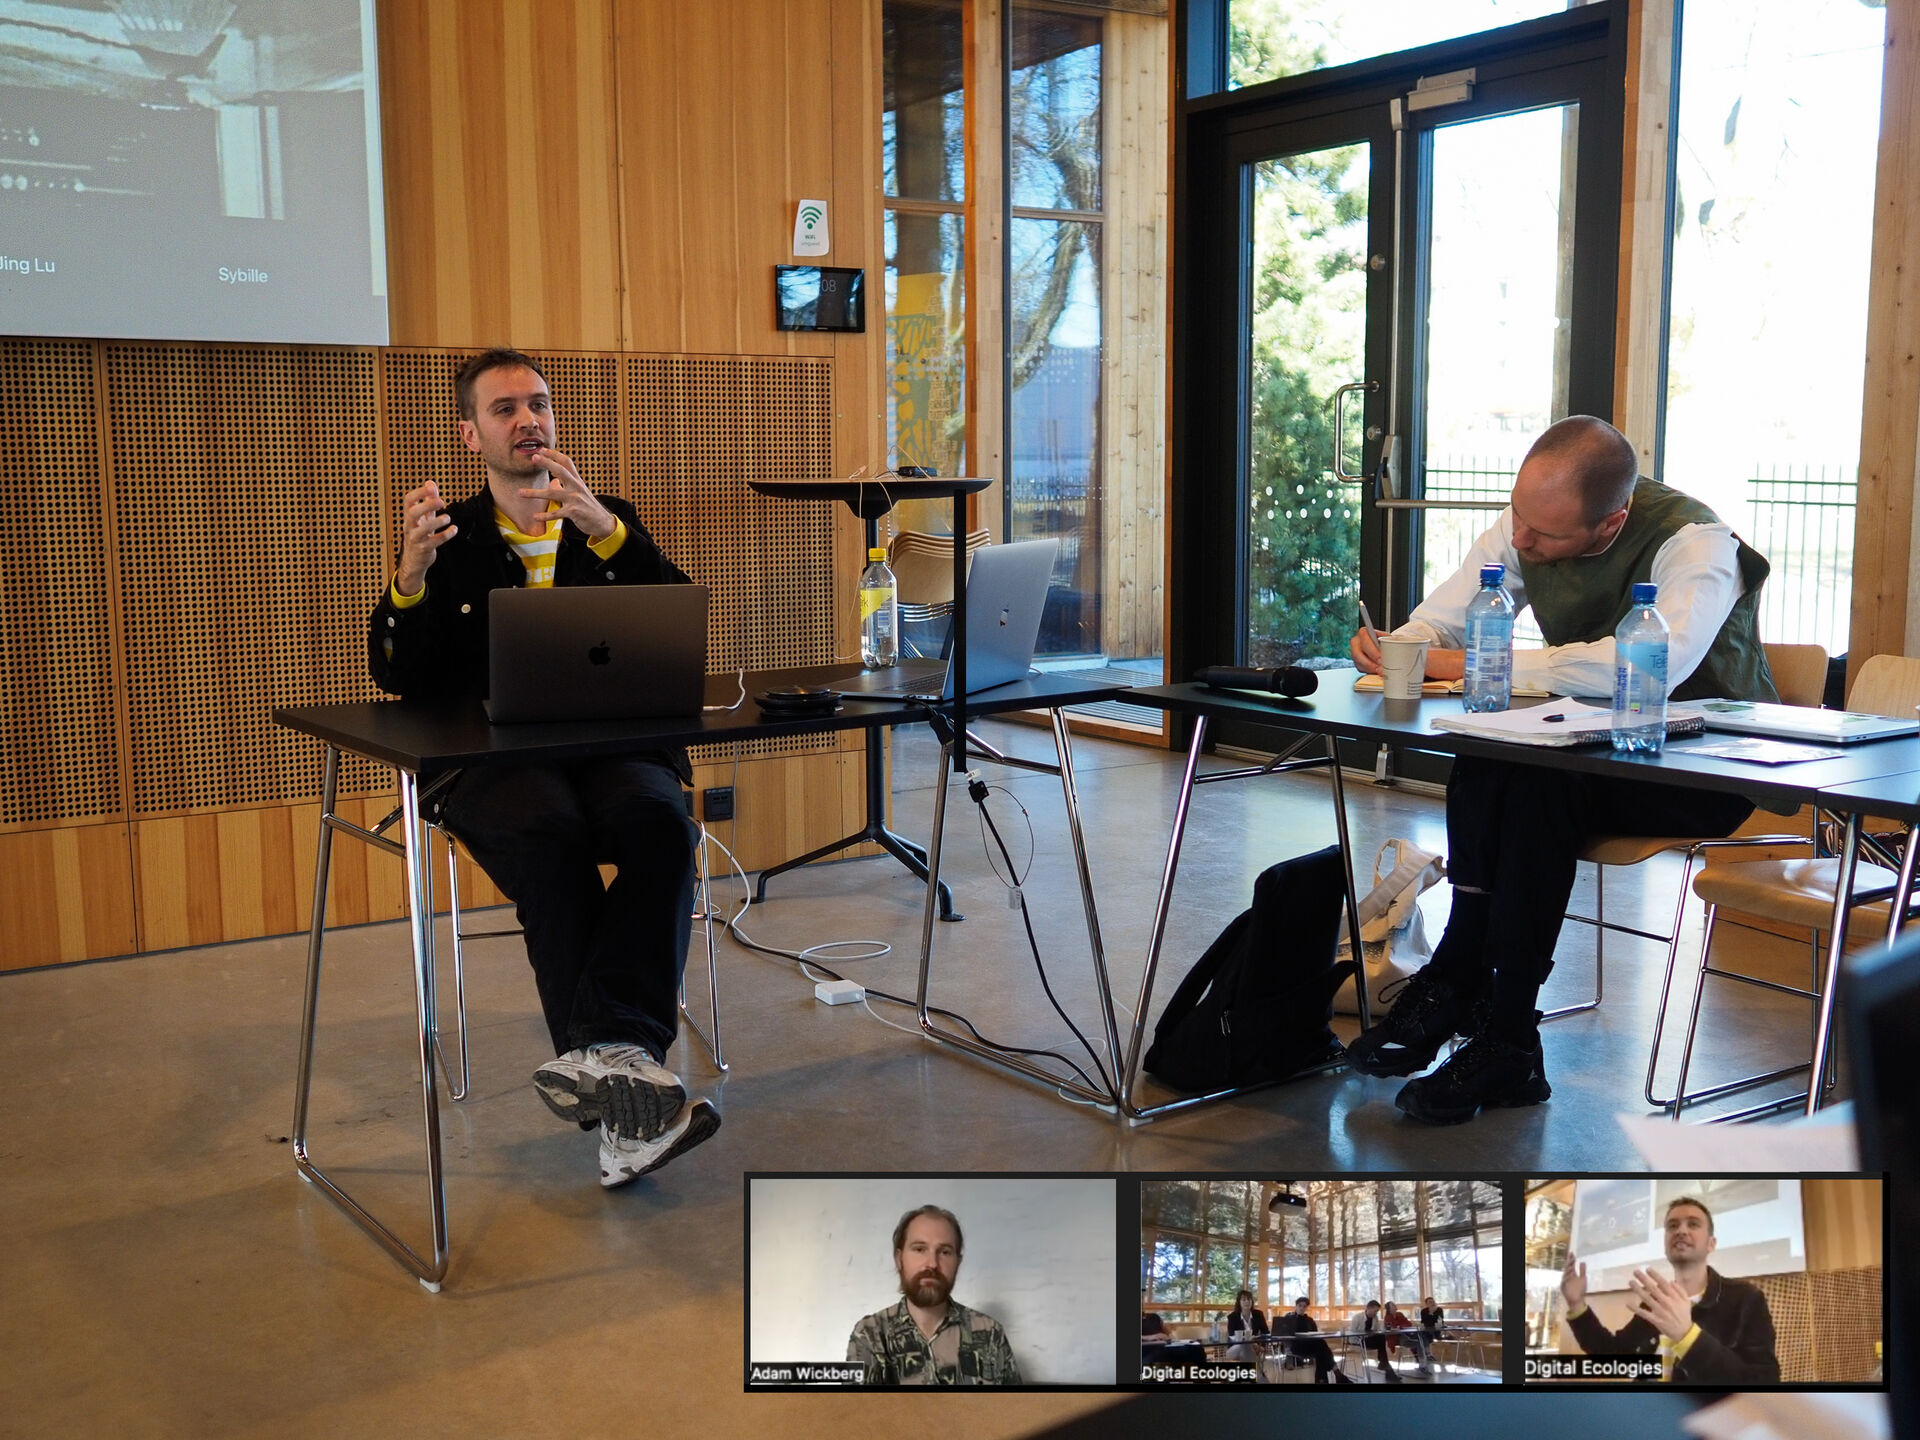 Screenshot of a Zoom meeting. A man is seated at the front of the room presenting. On his side is a member of the audience in the room, and you can also see small images of people attending virtually. 